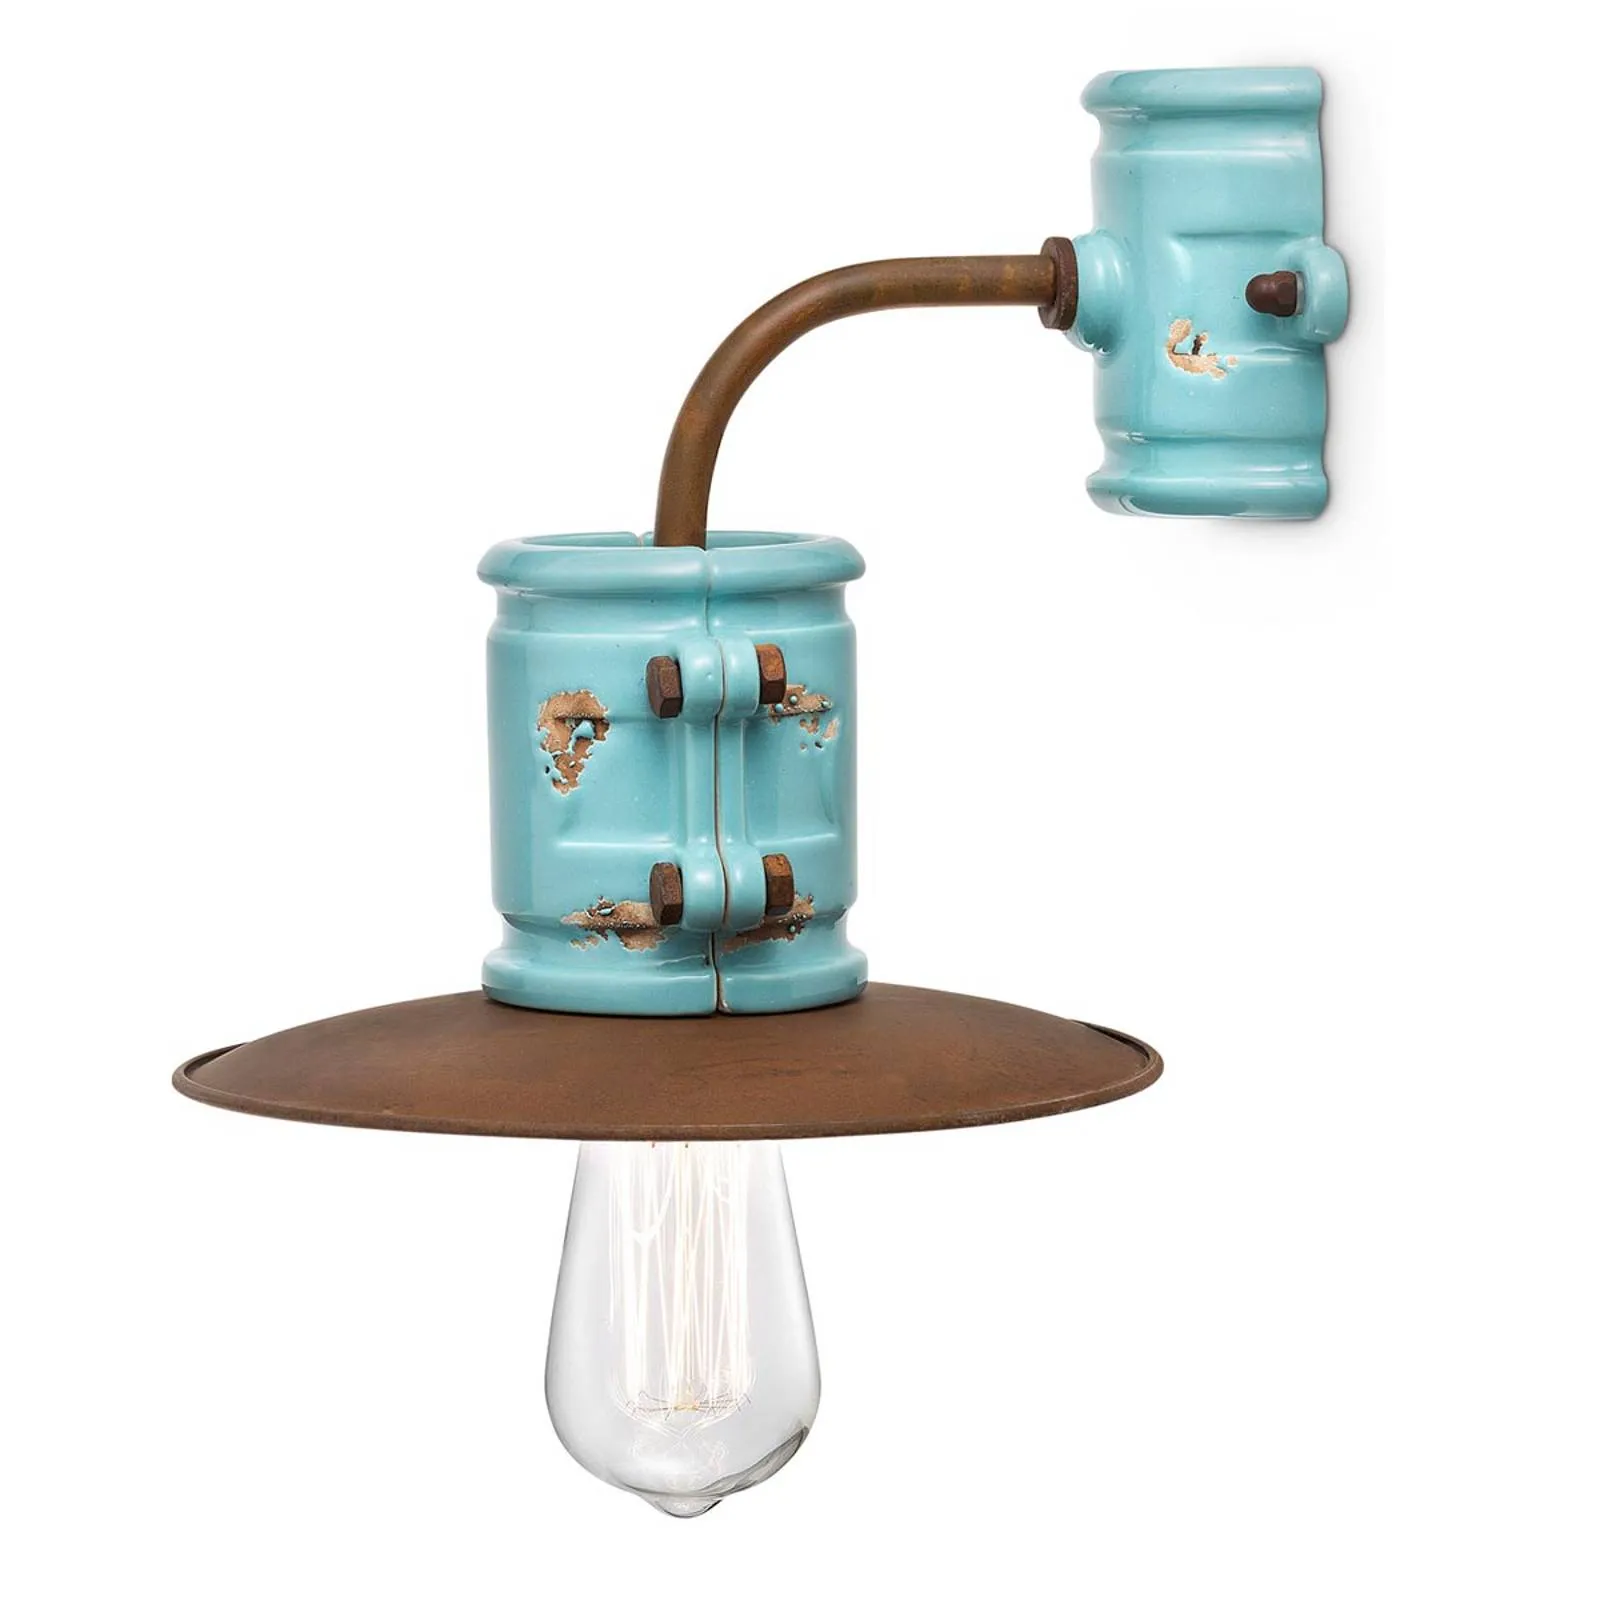 Nicolo wall light in a vintage style, turquoise